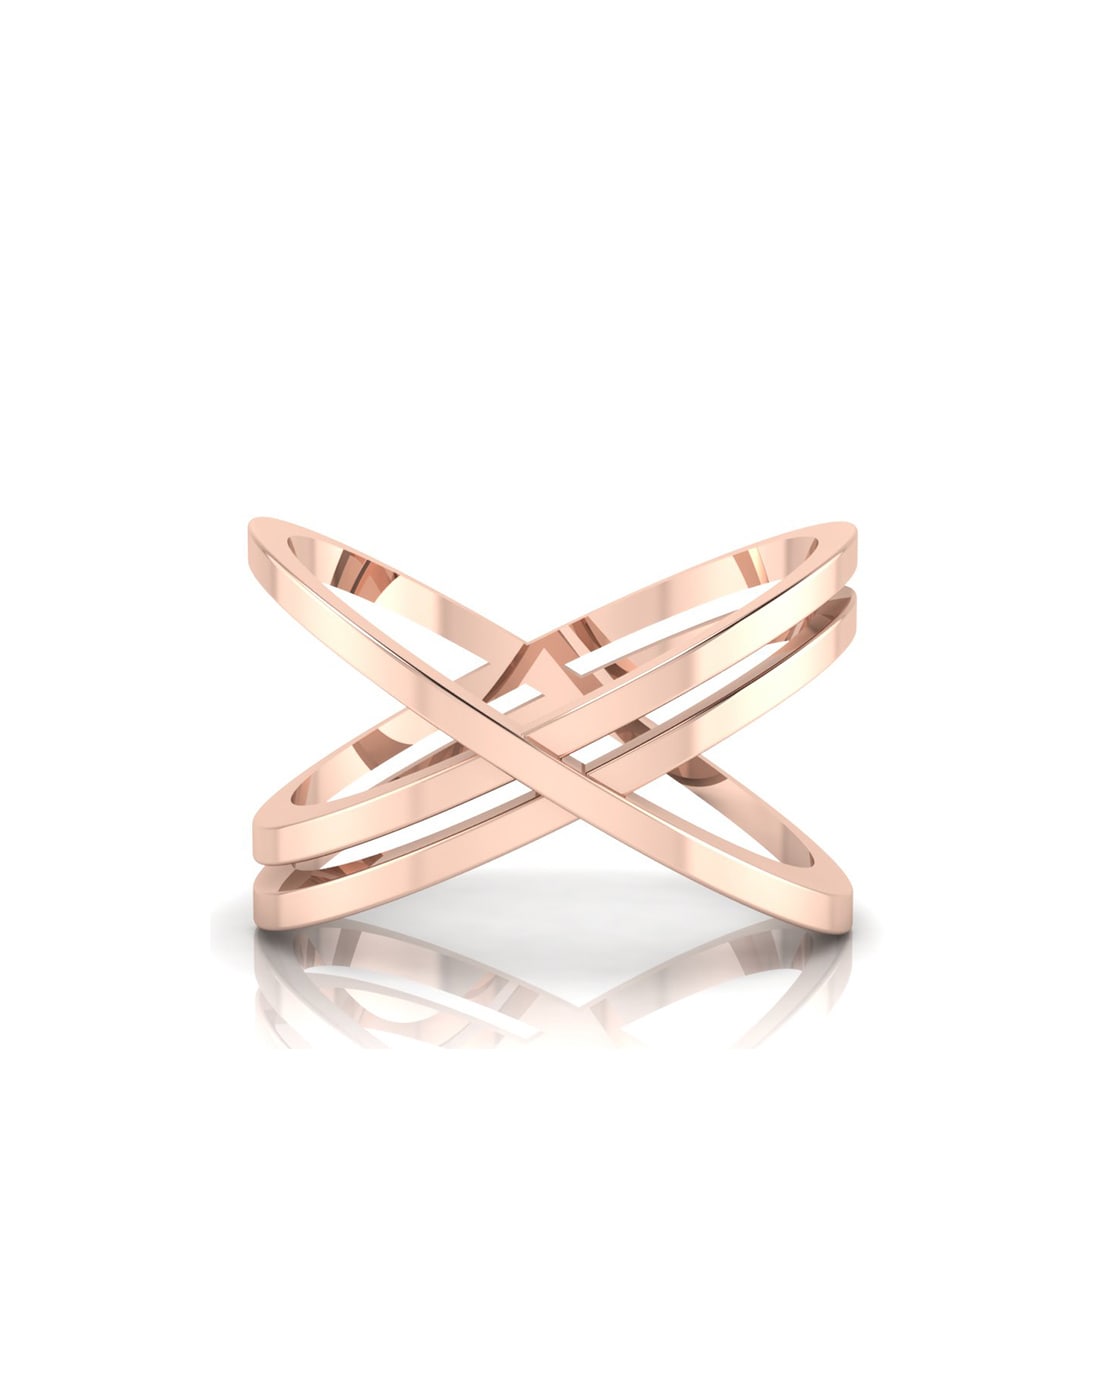 STR7RG Rose gold coated stackable rings with plain and hammered surface -  set of 3 rings5 | Gold coating, Gold rings, Stackable rings